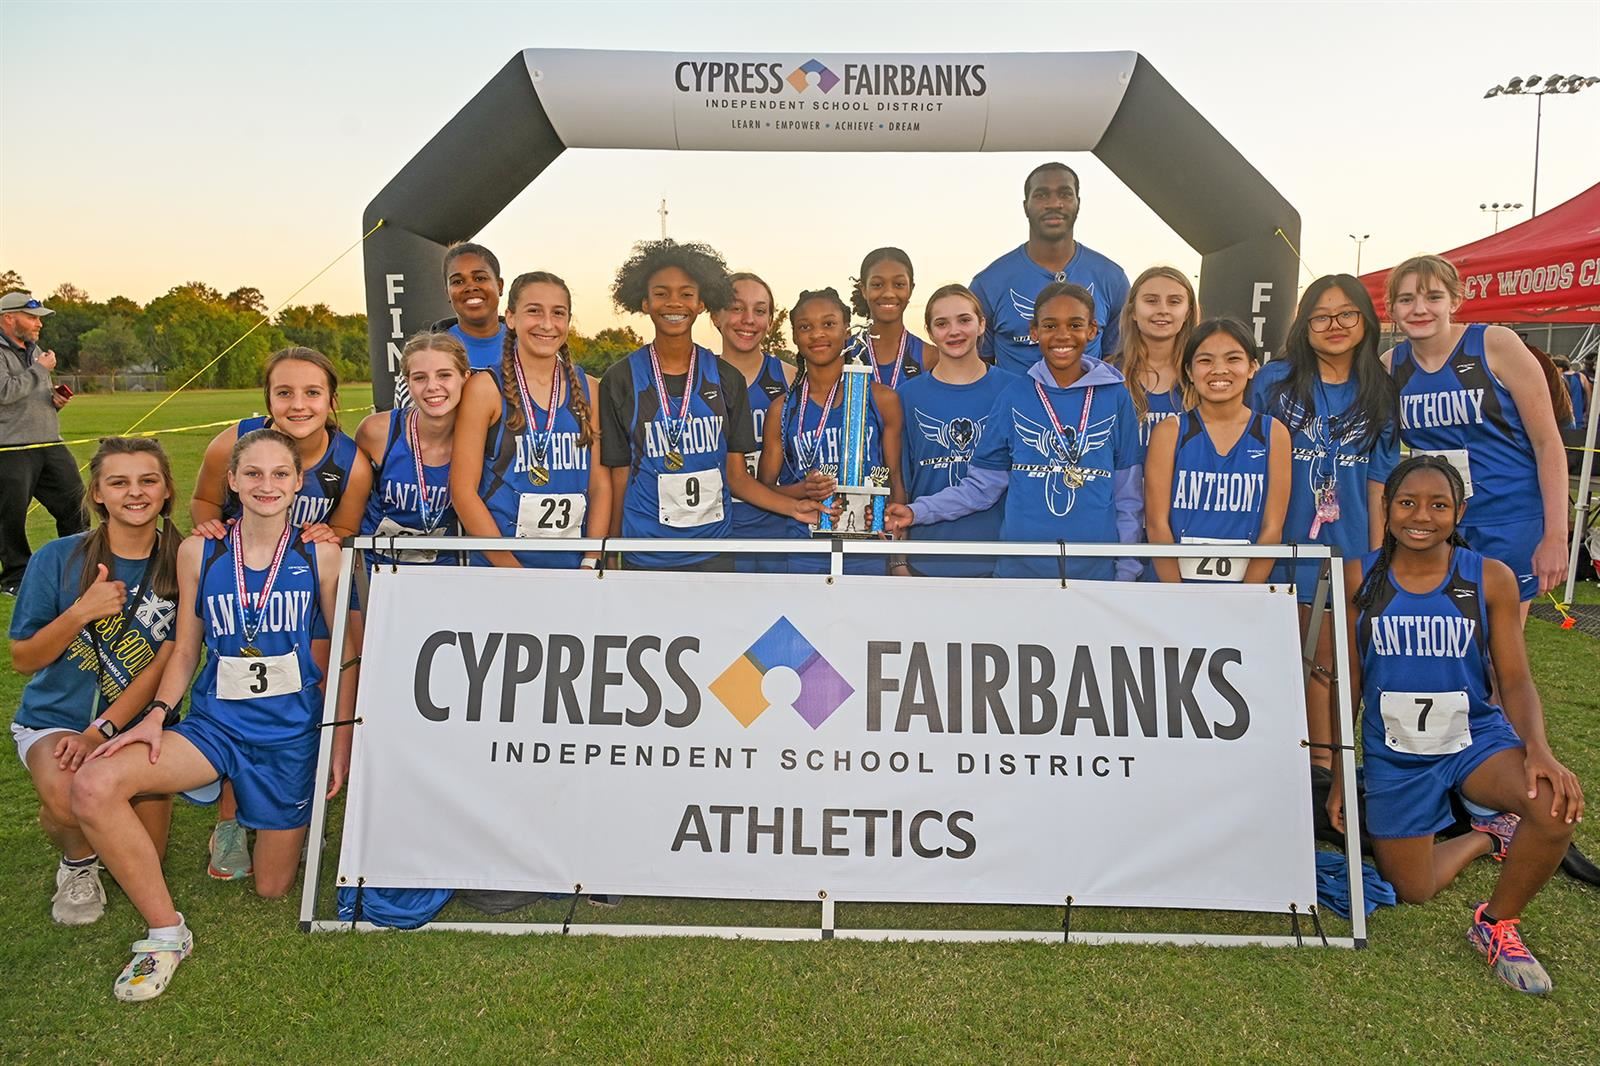 Anthony Middle School won the eighth grade girls’ cross country team championship with a score of 40 points on Oct. 19.